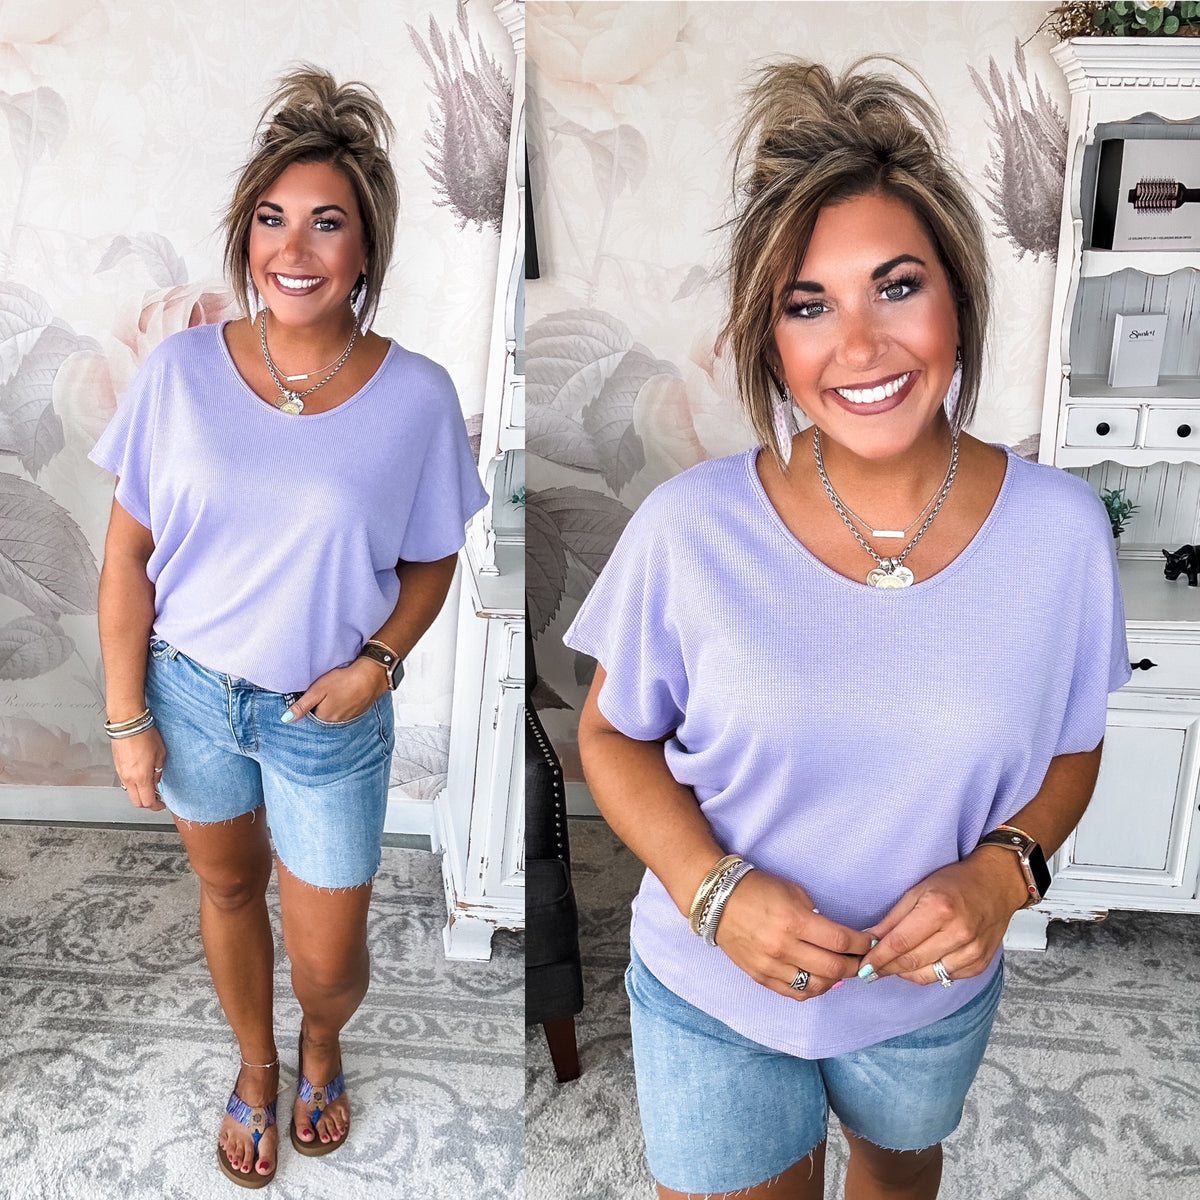 Simply The Best Tee - Lavender